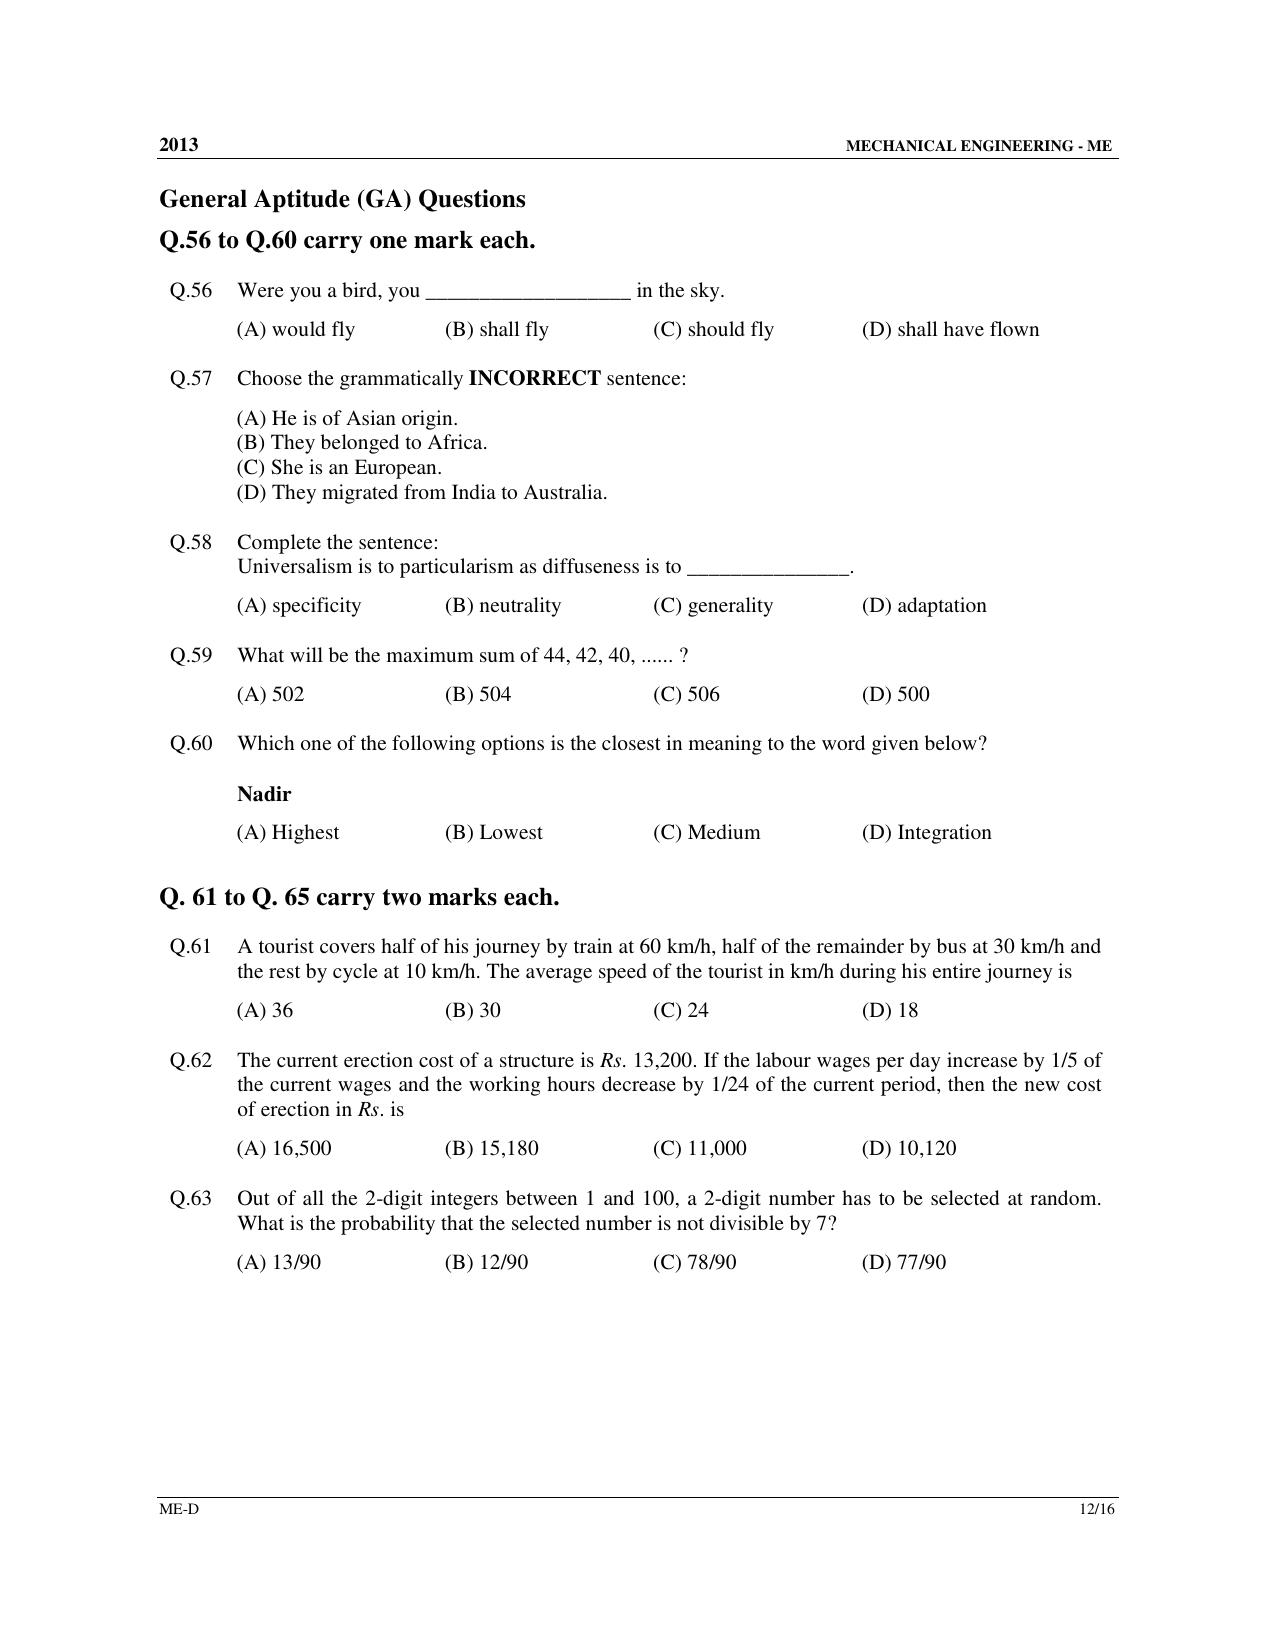 GATE 2013 Mechanical Engineering (ME) Question Paper with Answer Key - Page 55